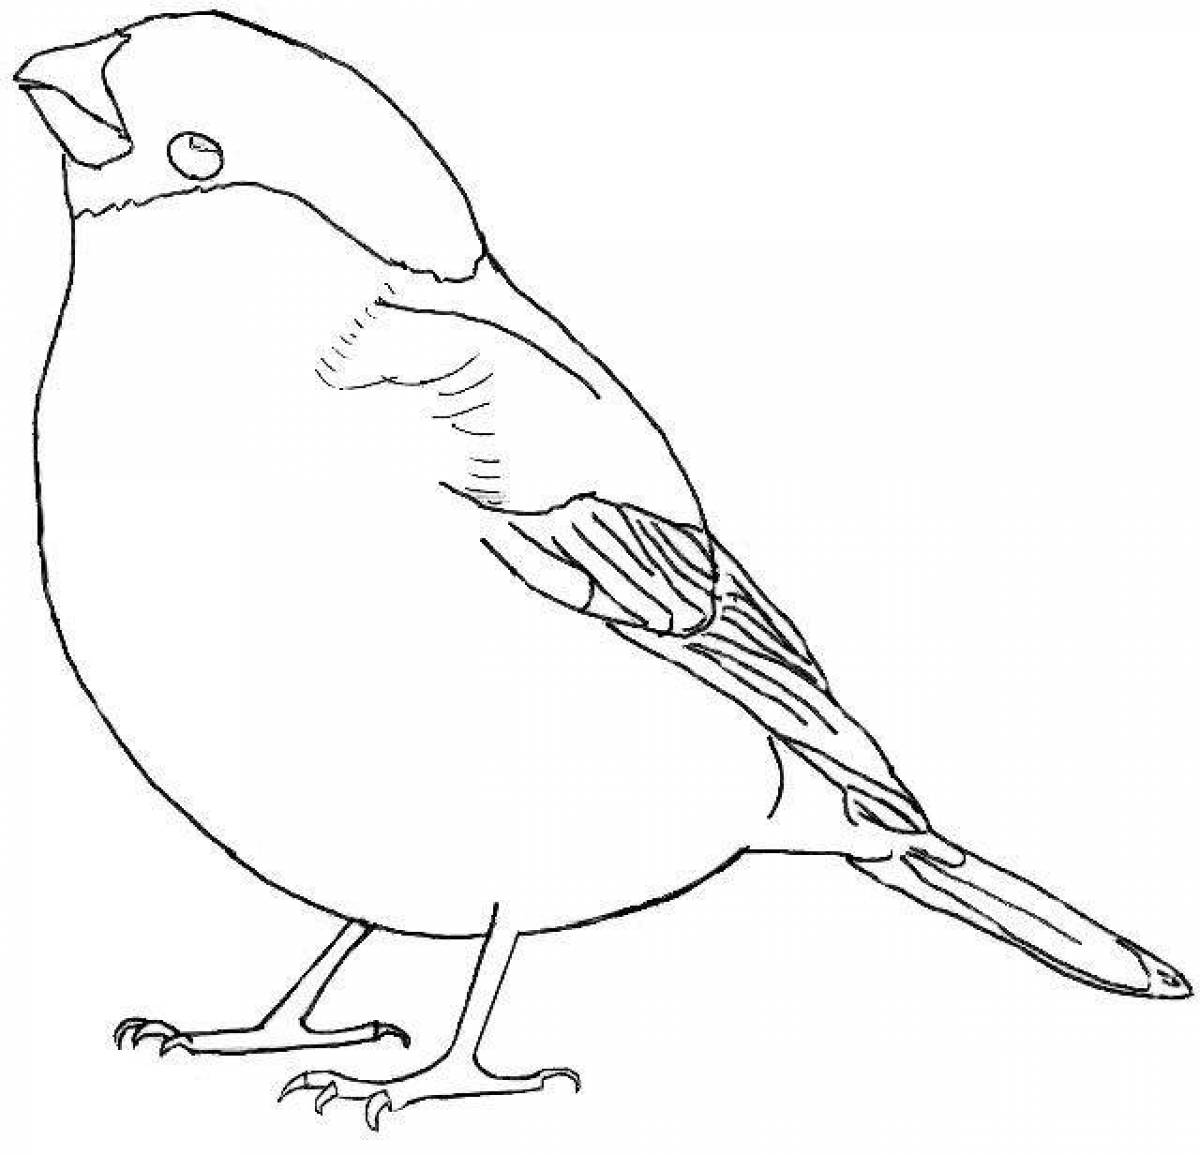 Attractive drawing of a bullfinch